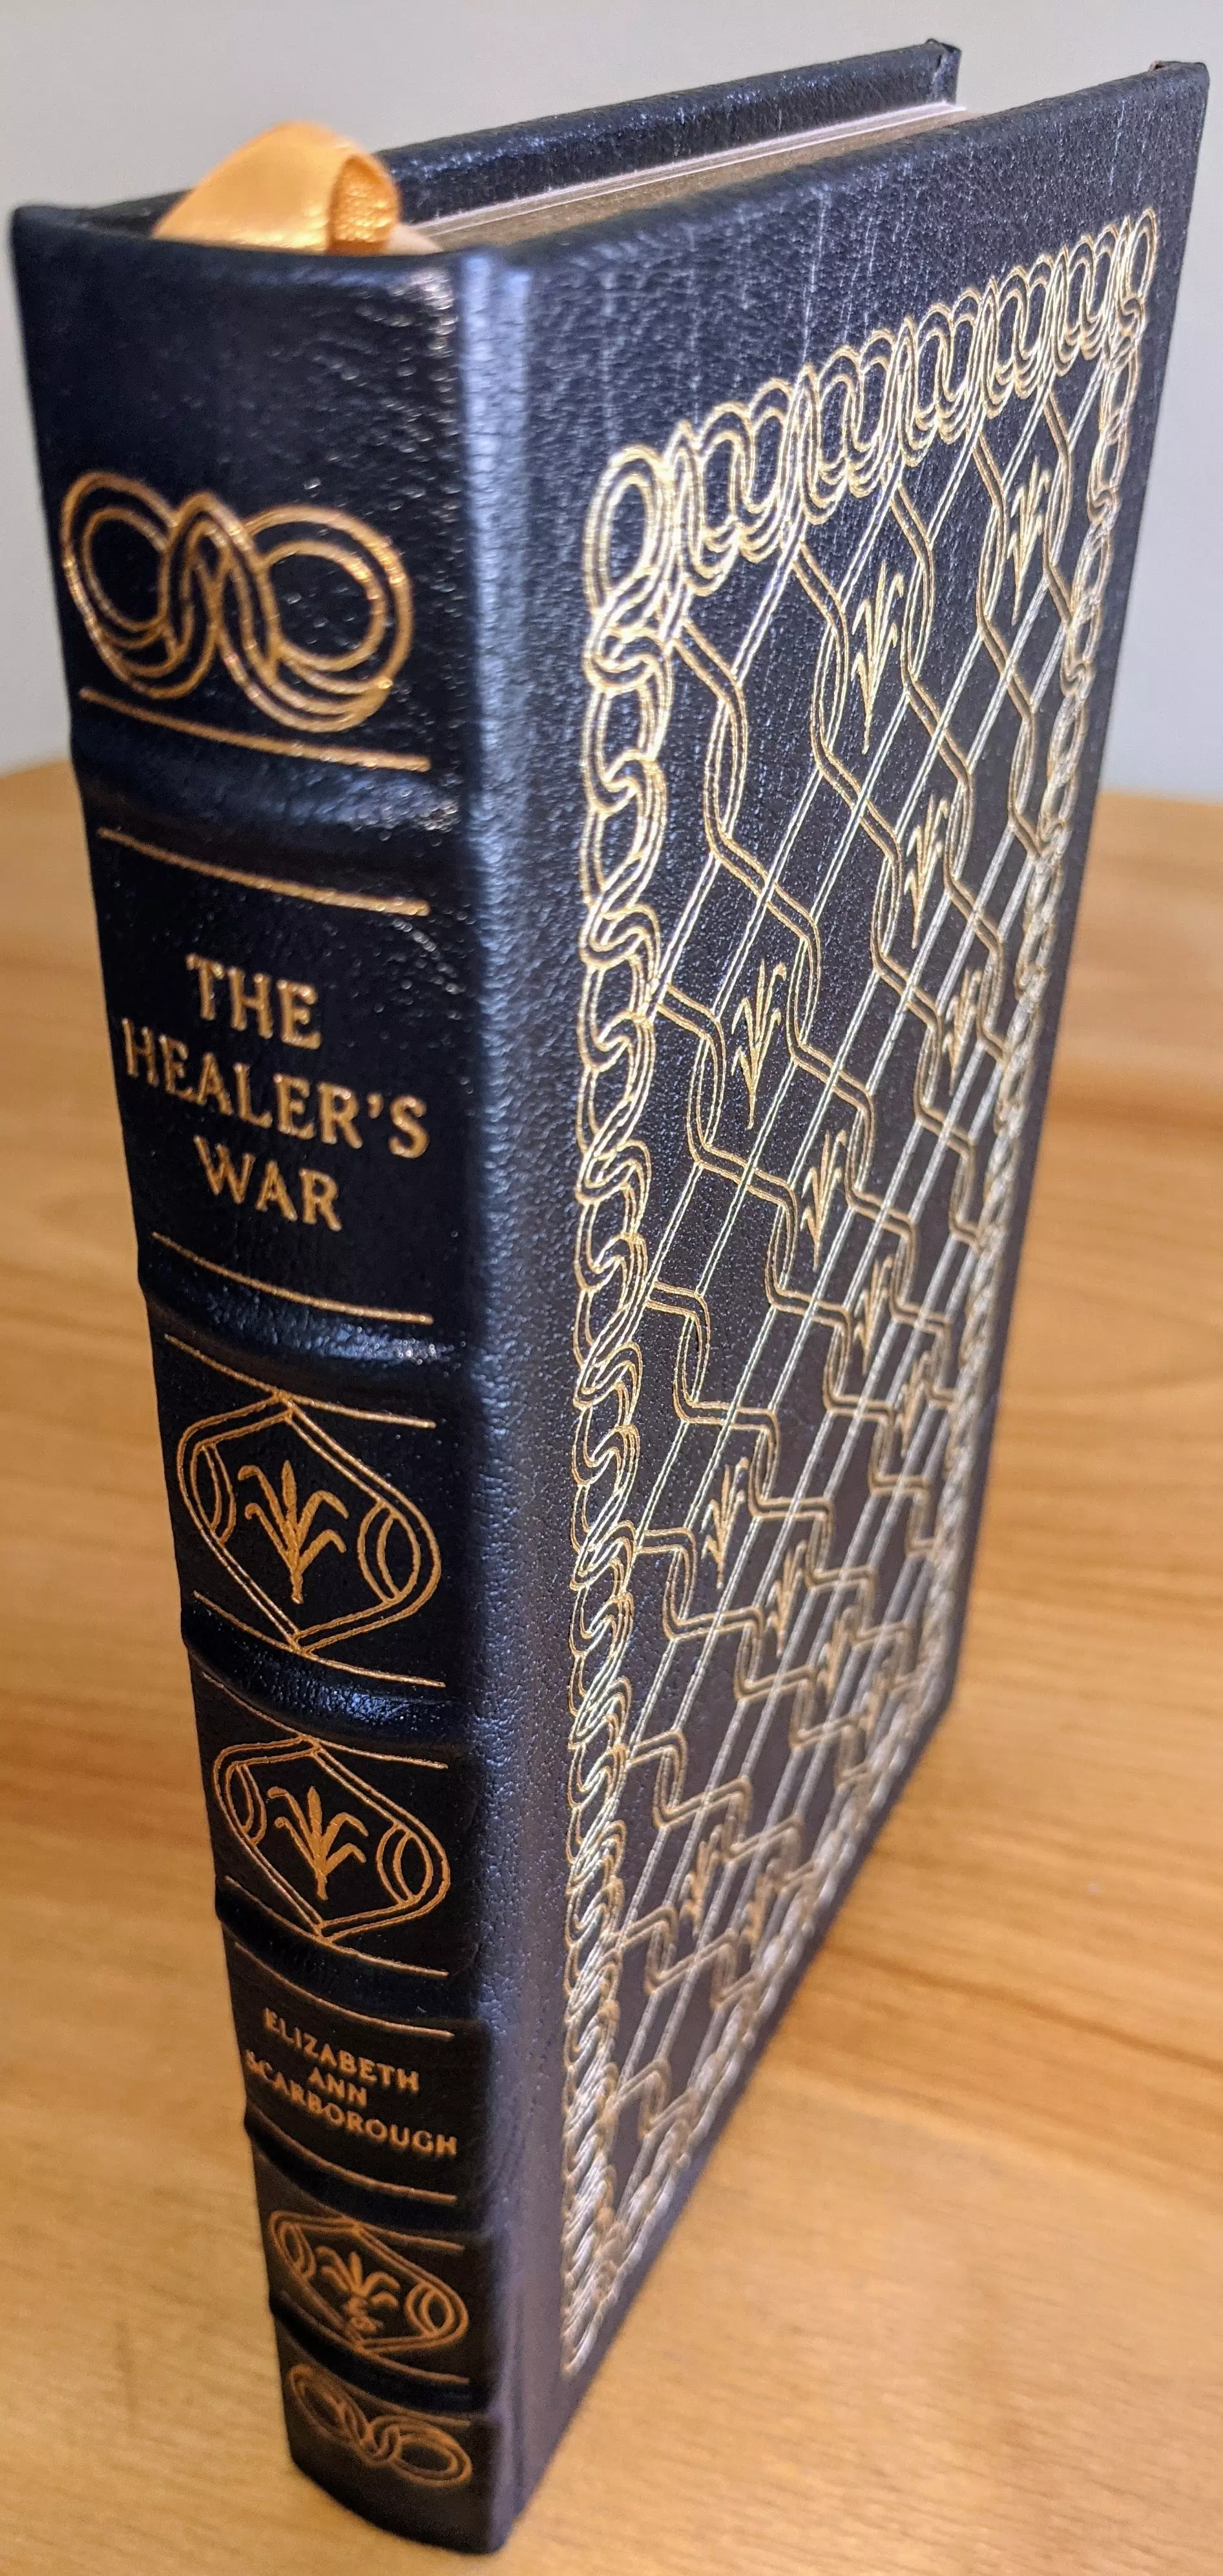 Stunning Blue Leather Bound hardback book with hubbed spine, cover artwork in 22kt gold, printed on archival paper with gold gilded edges, smyth sewing & concealed muslin joints
	  - original artwork by Frank Kelly Freas